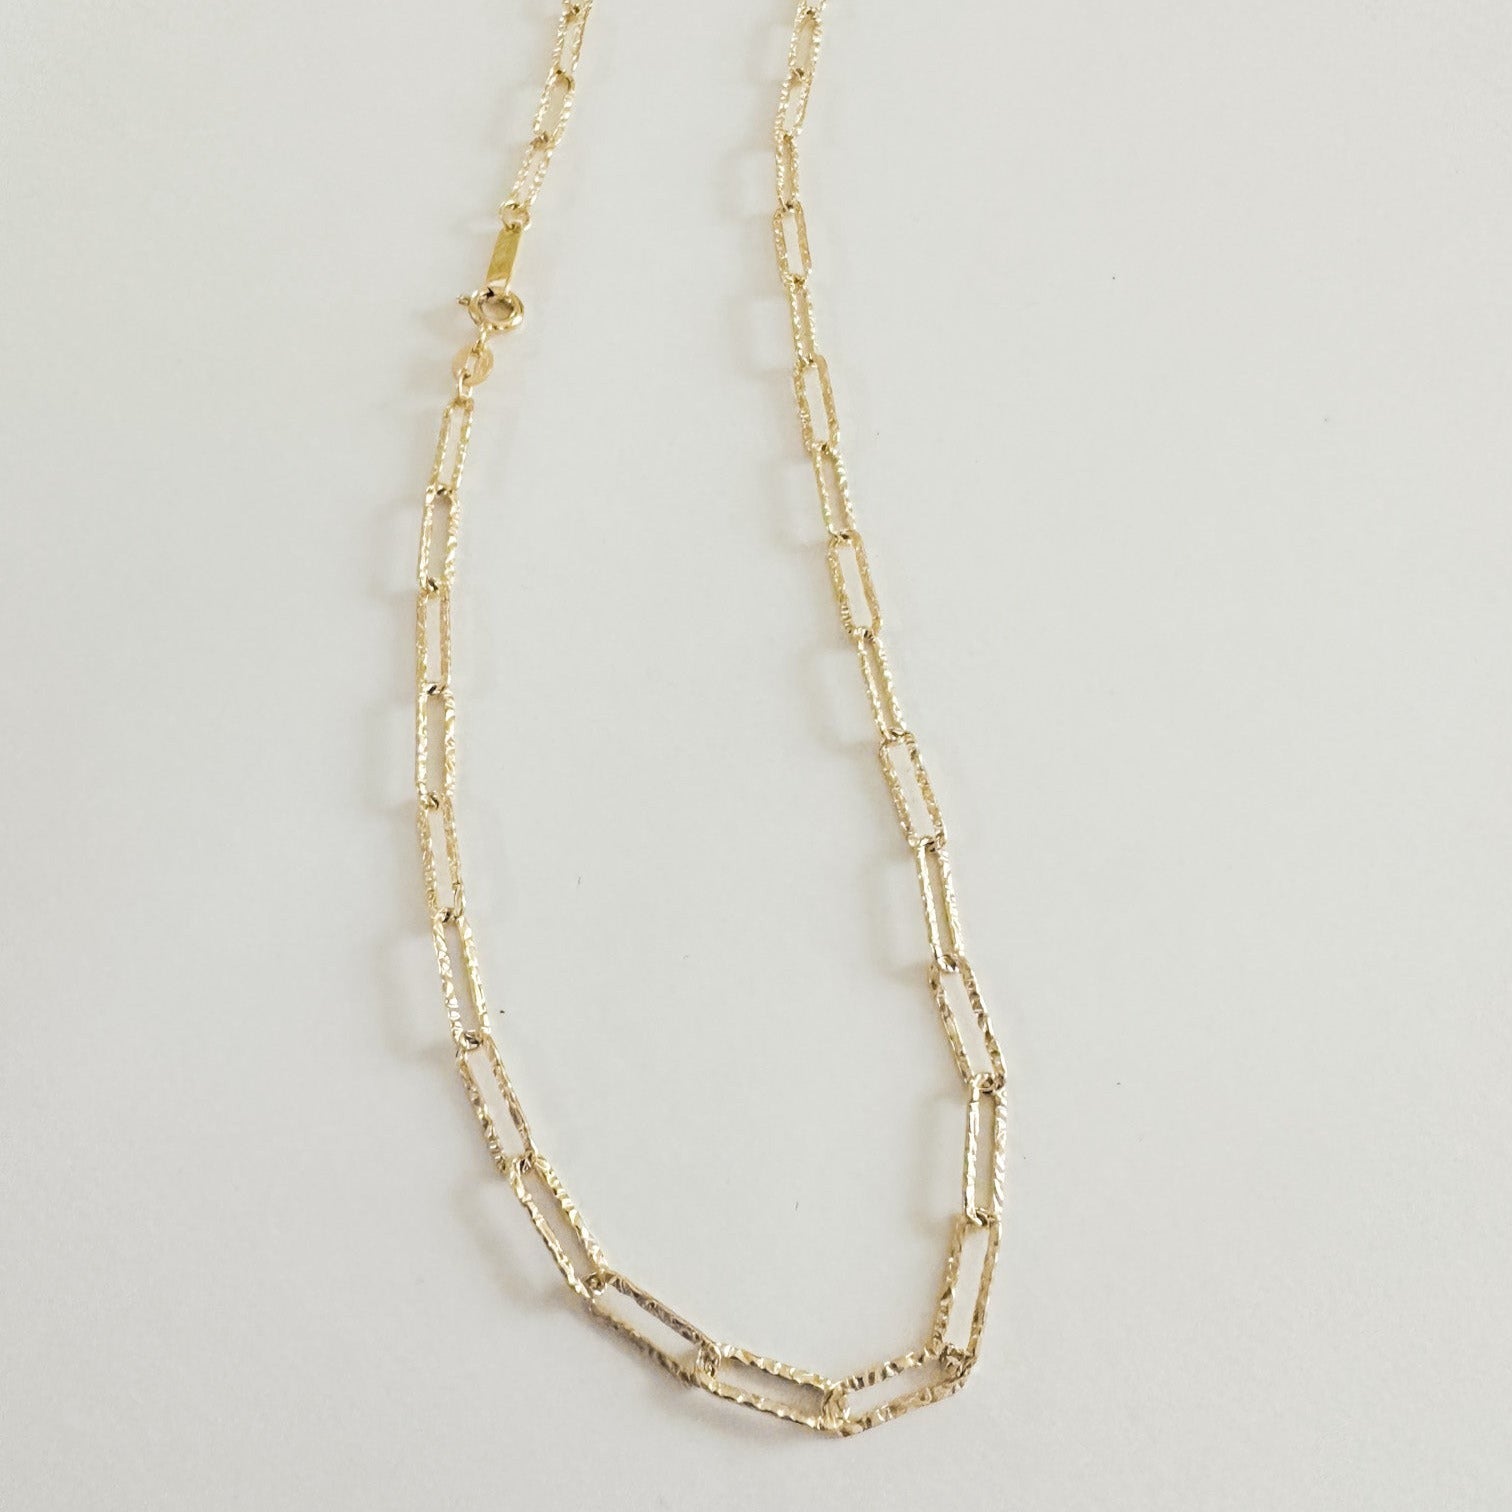 Hammered paperclip necklace in 18ct Gold Plated